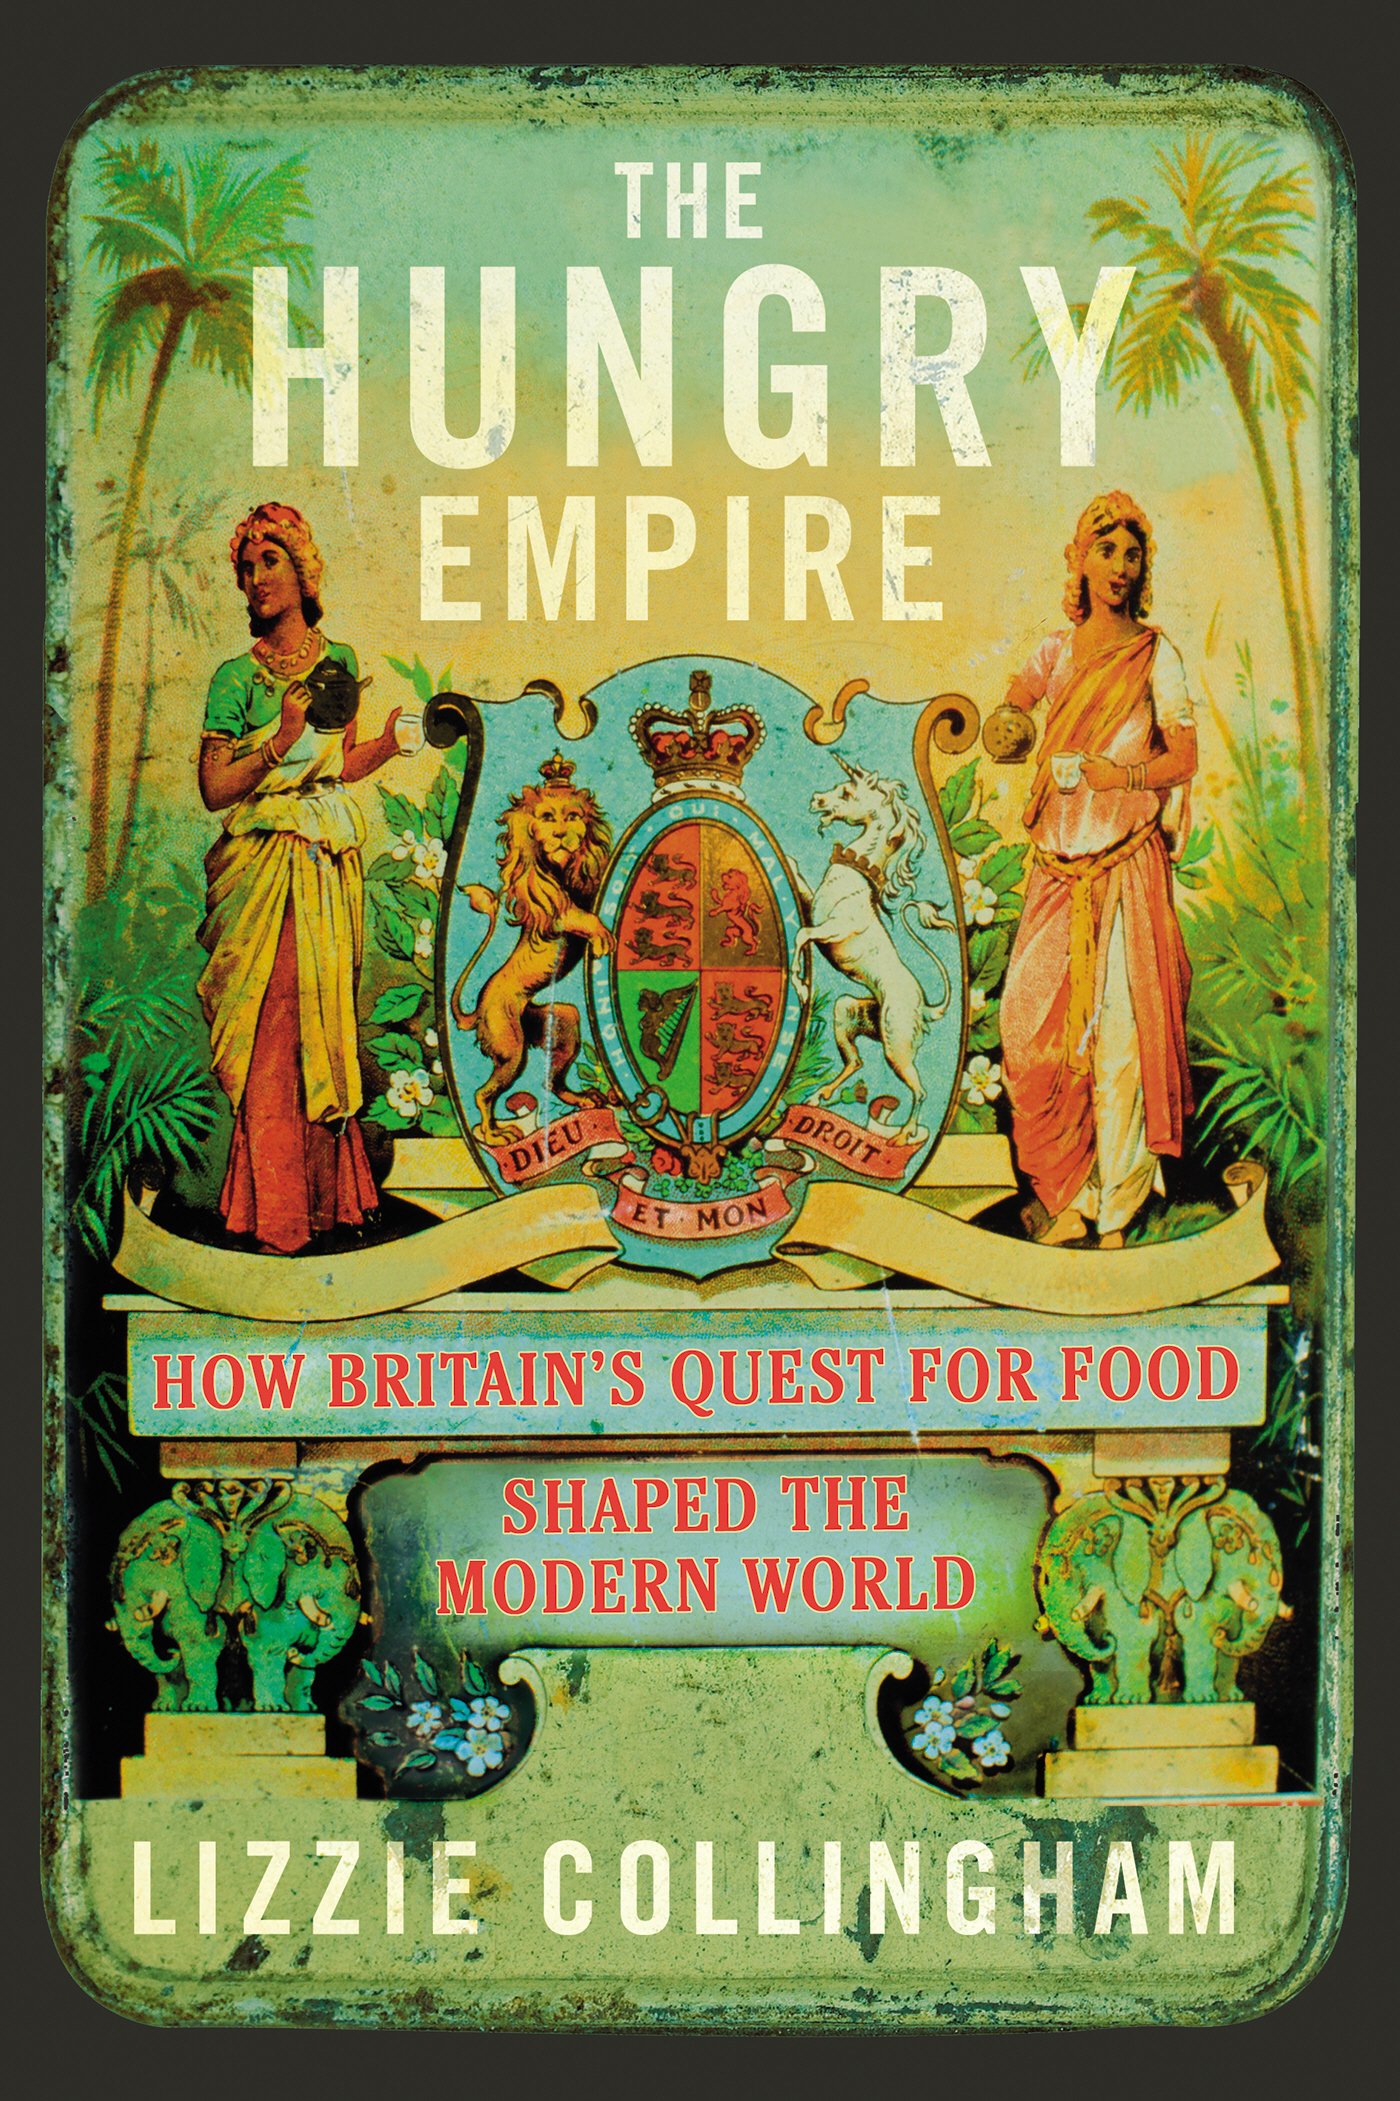 'The hungry empire: how Britain's quest for food shaped the modern world', by Lizzie CollinghamBooklist The Hungry Empire